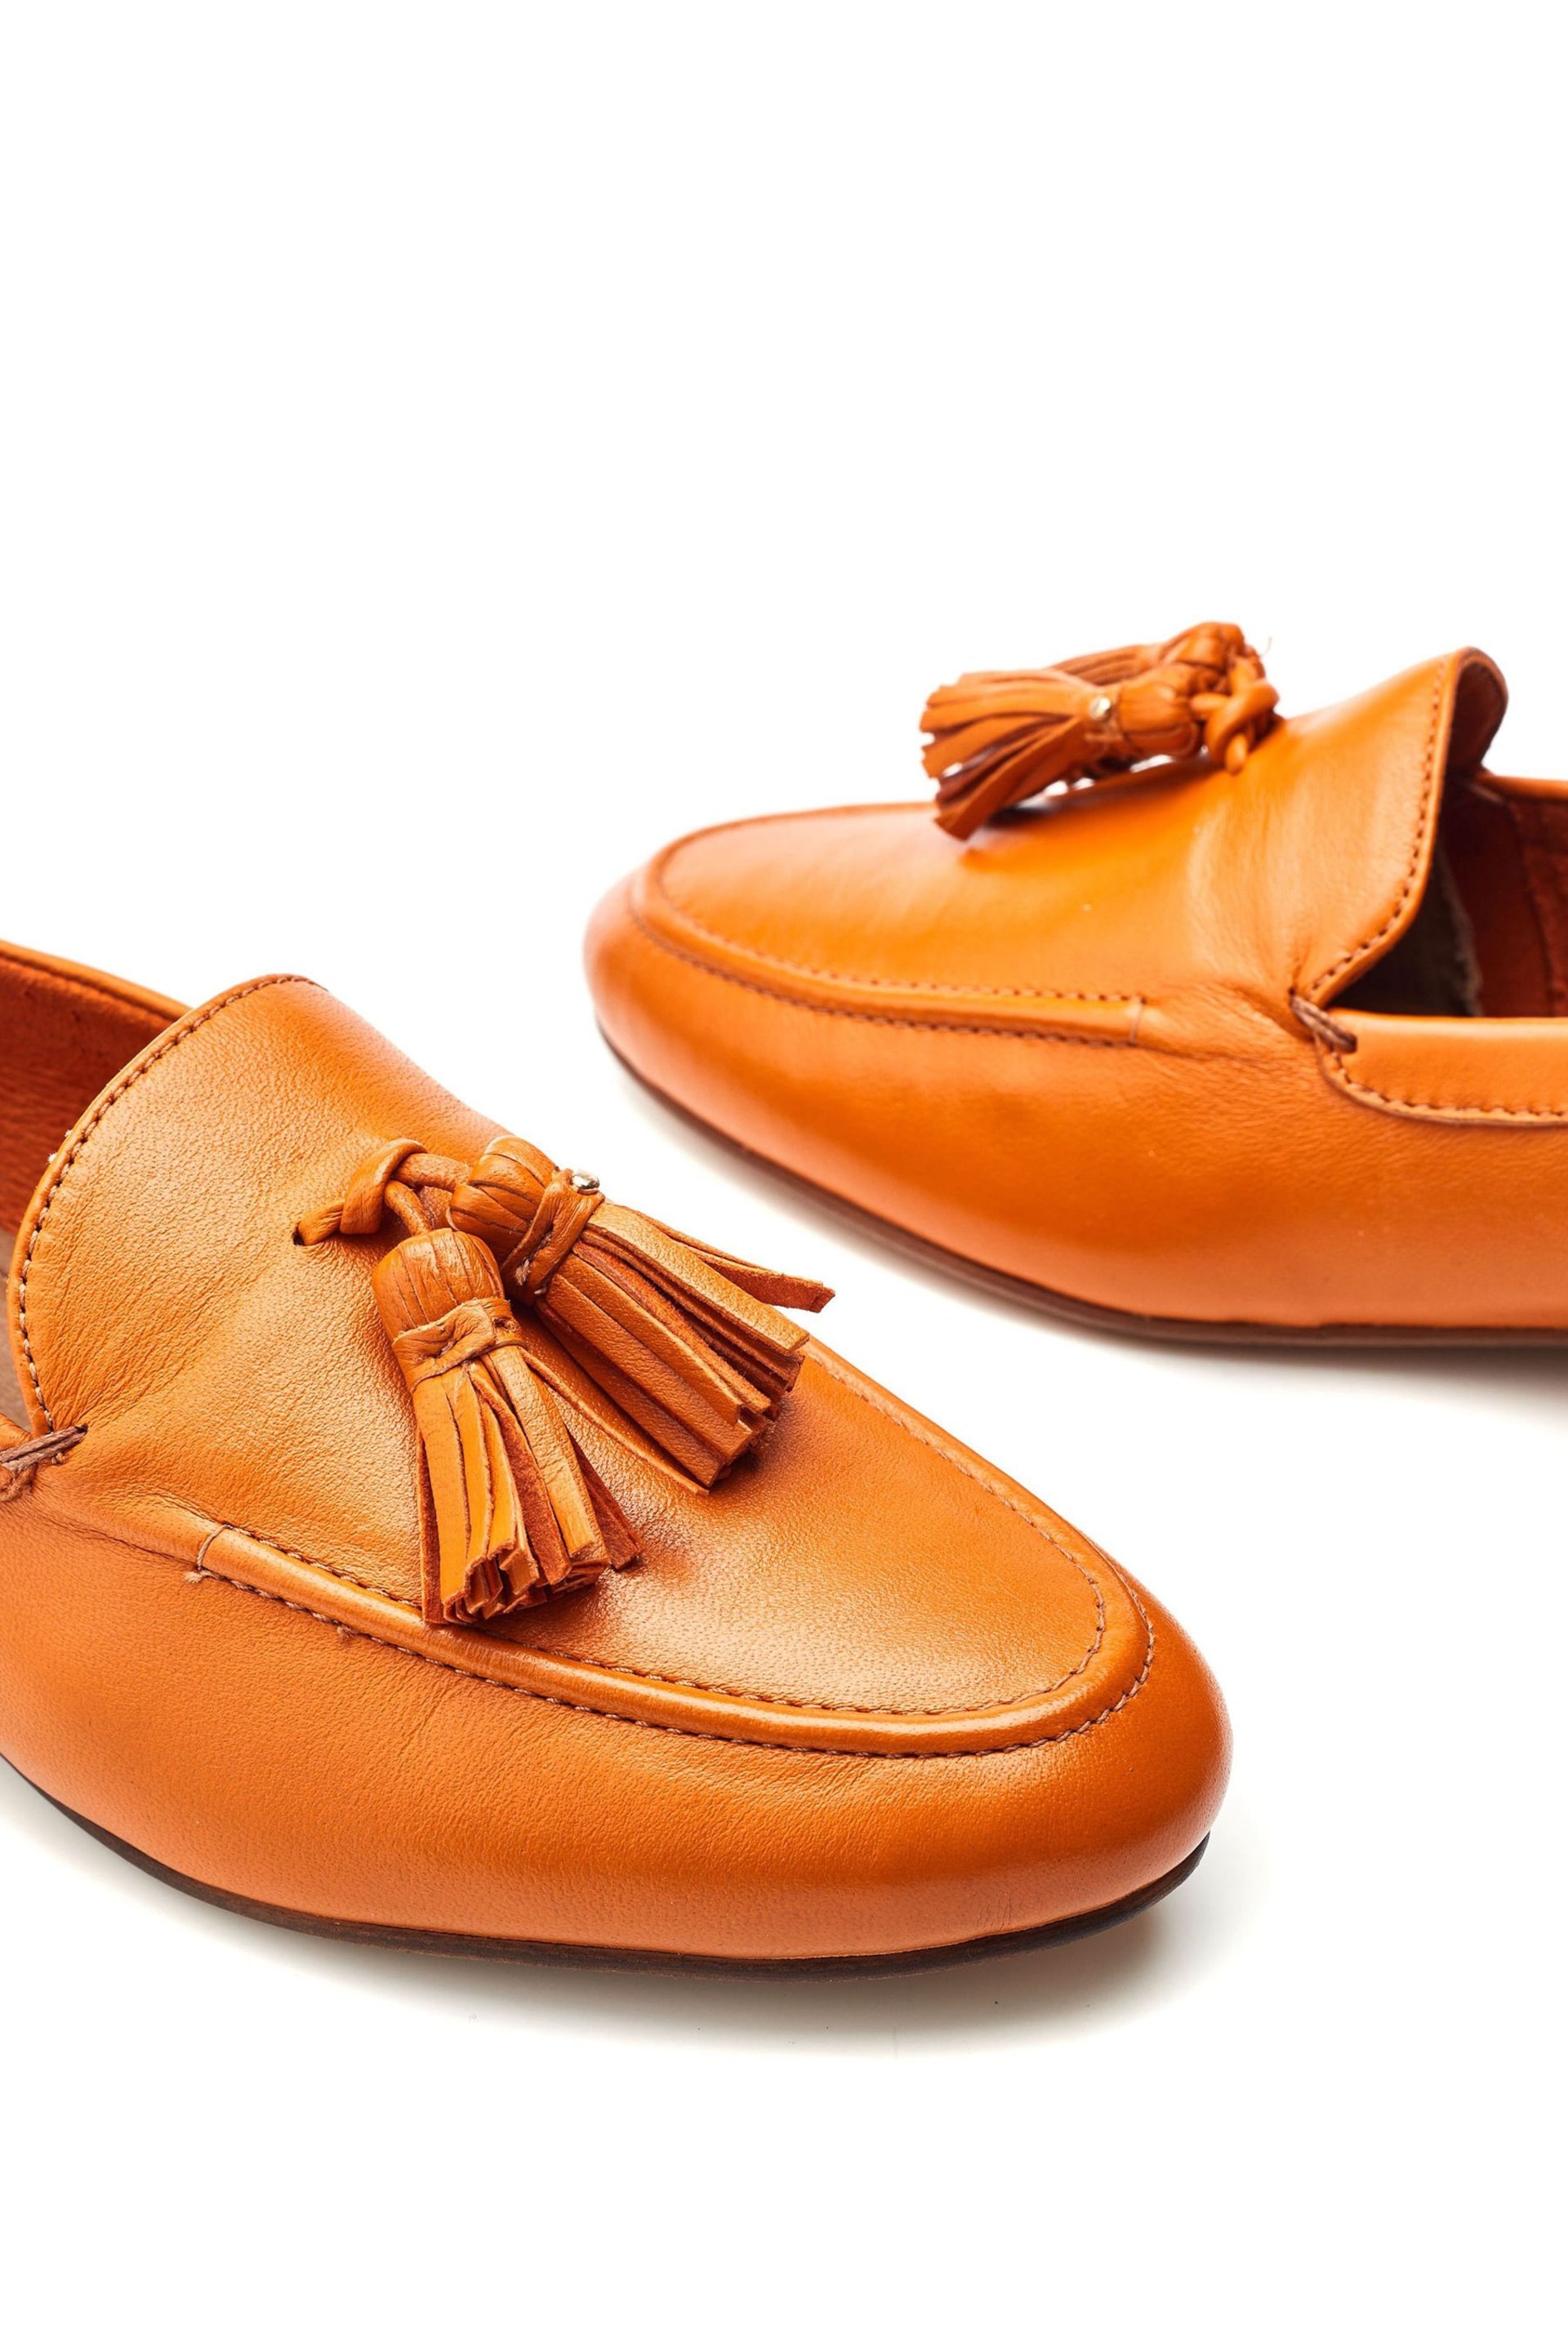 Moda in Pelle Ellmia Clean Loafer With Tassle - Image 4 of 4